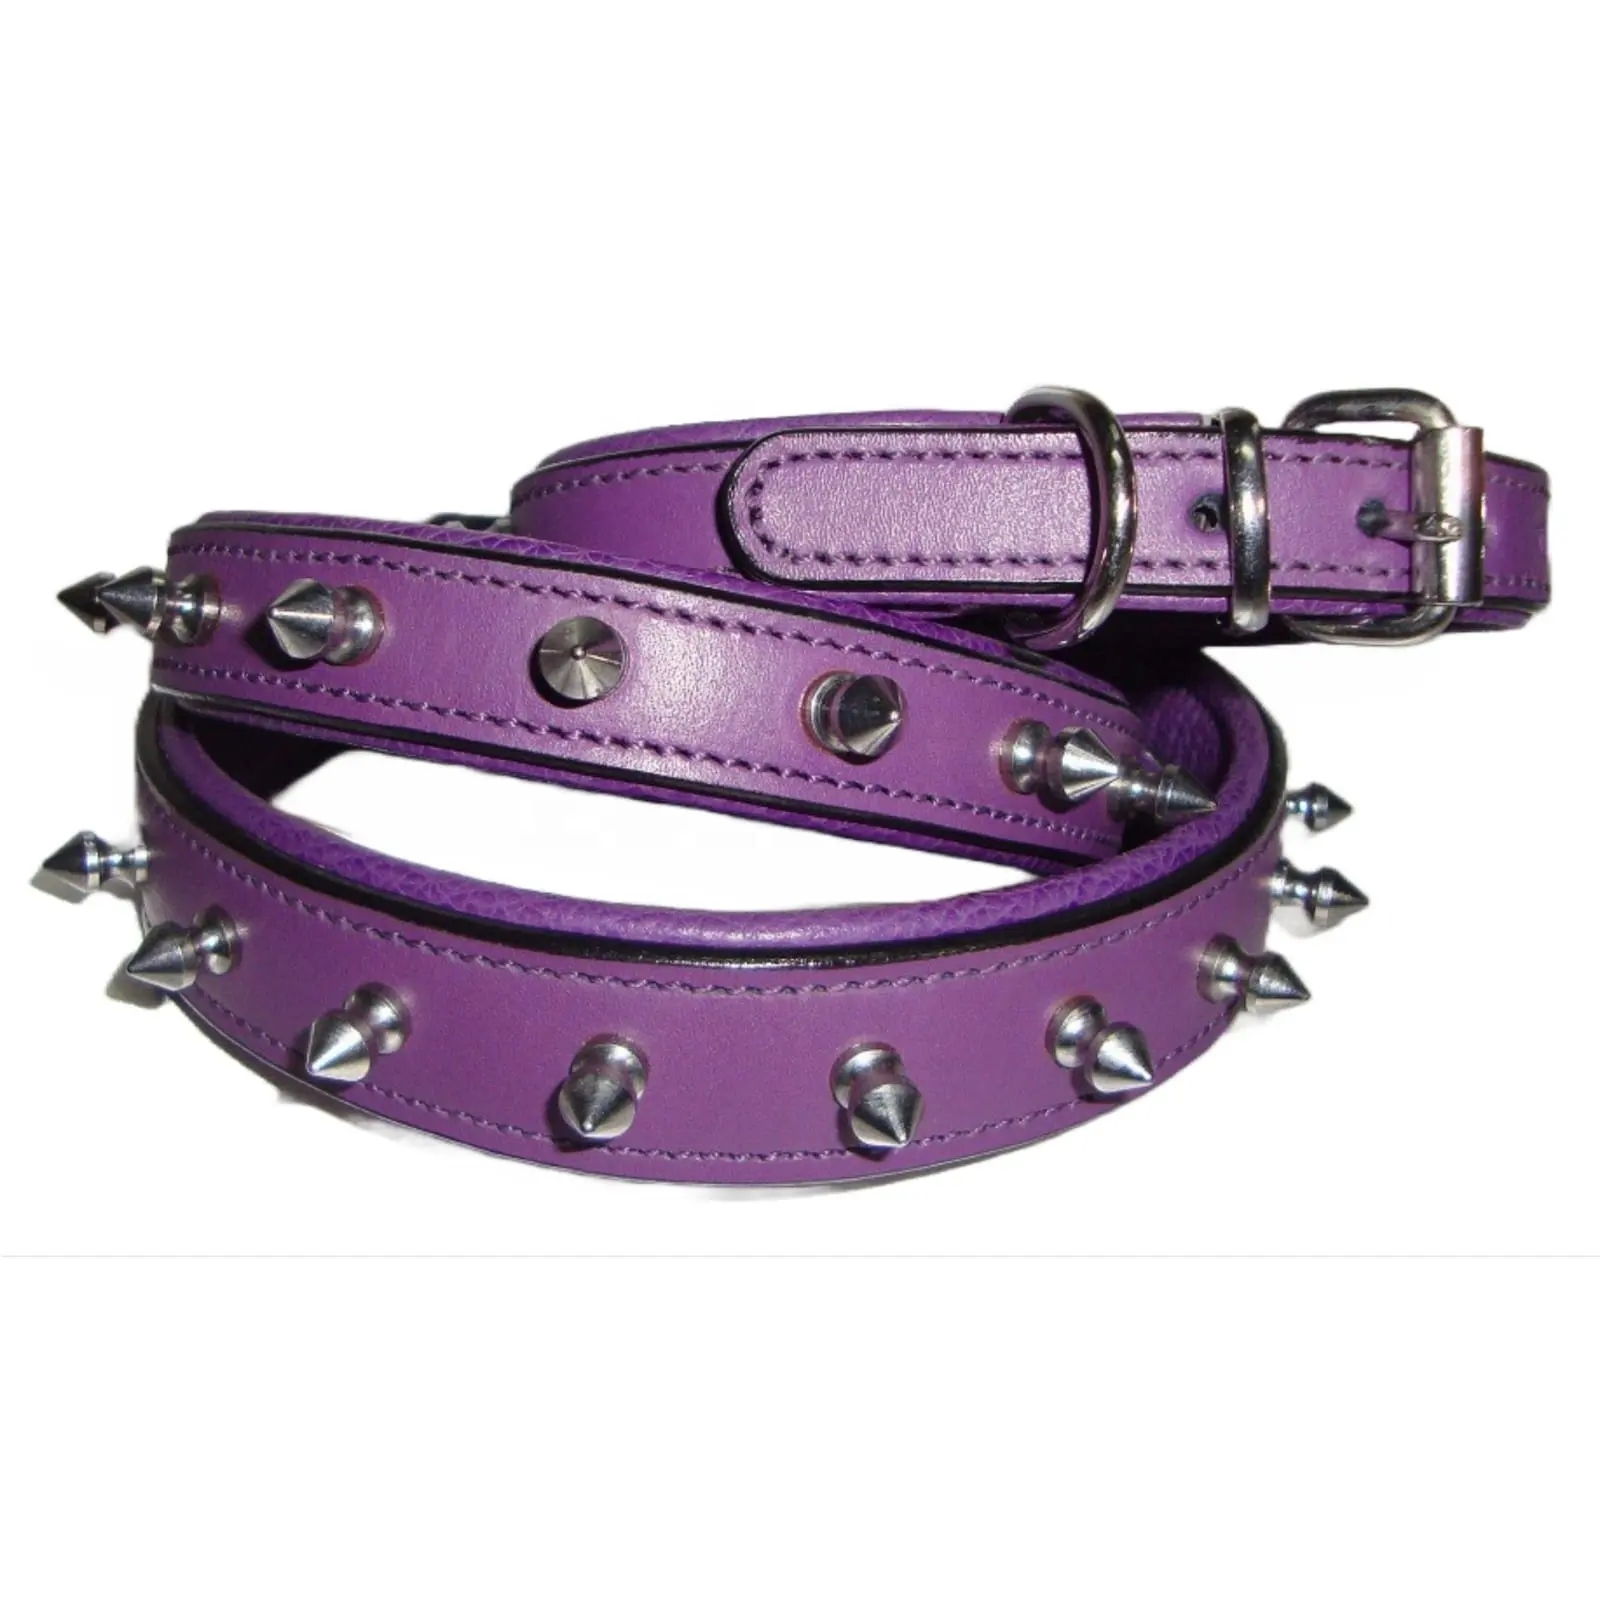 Best Quality leather Material stud Dog Collar Buy from Leading At Affordable Price